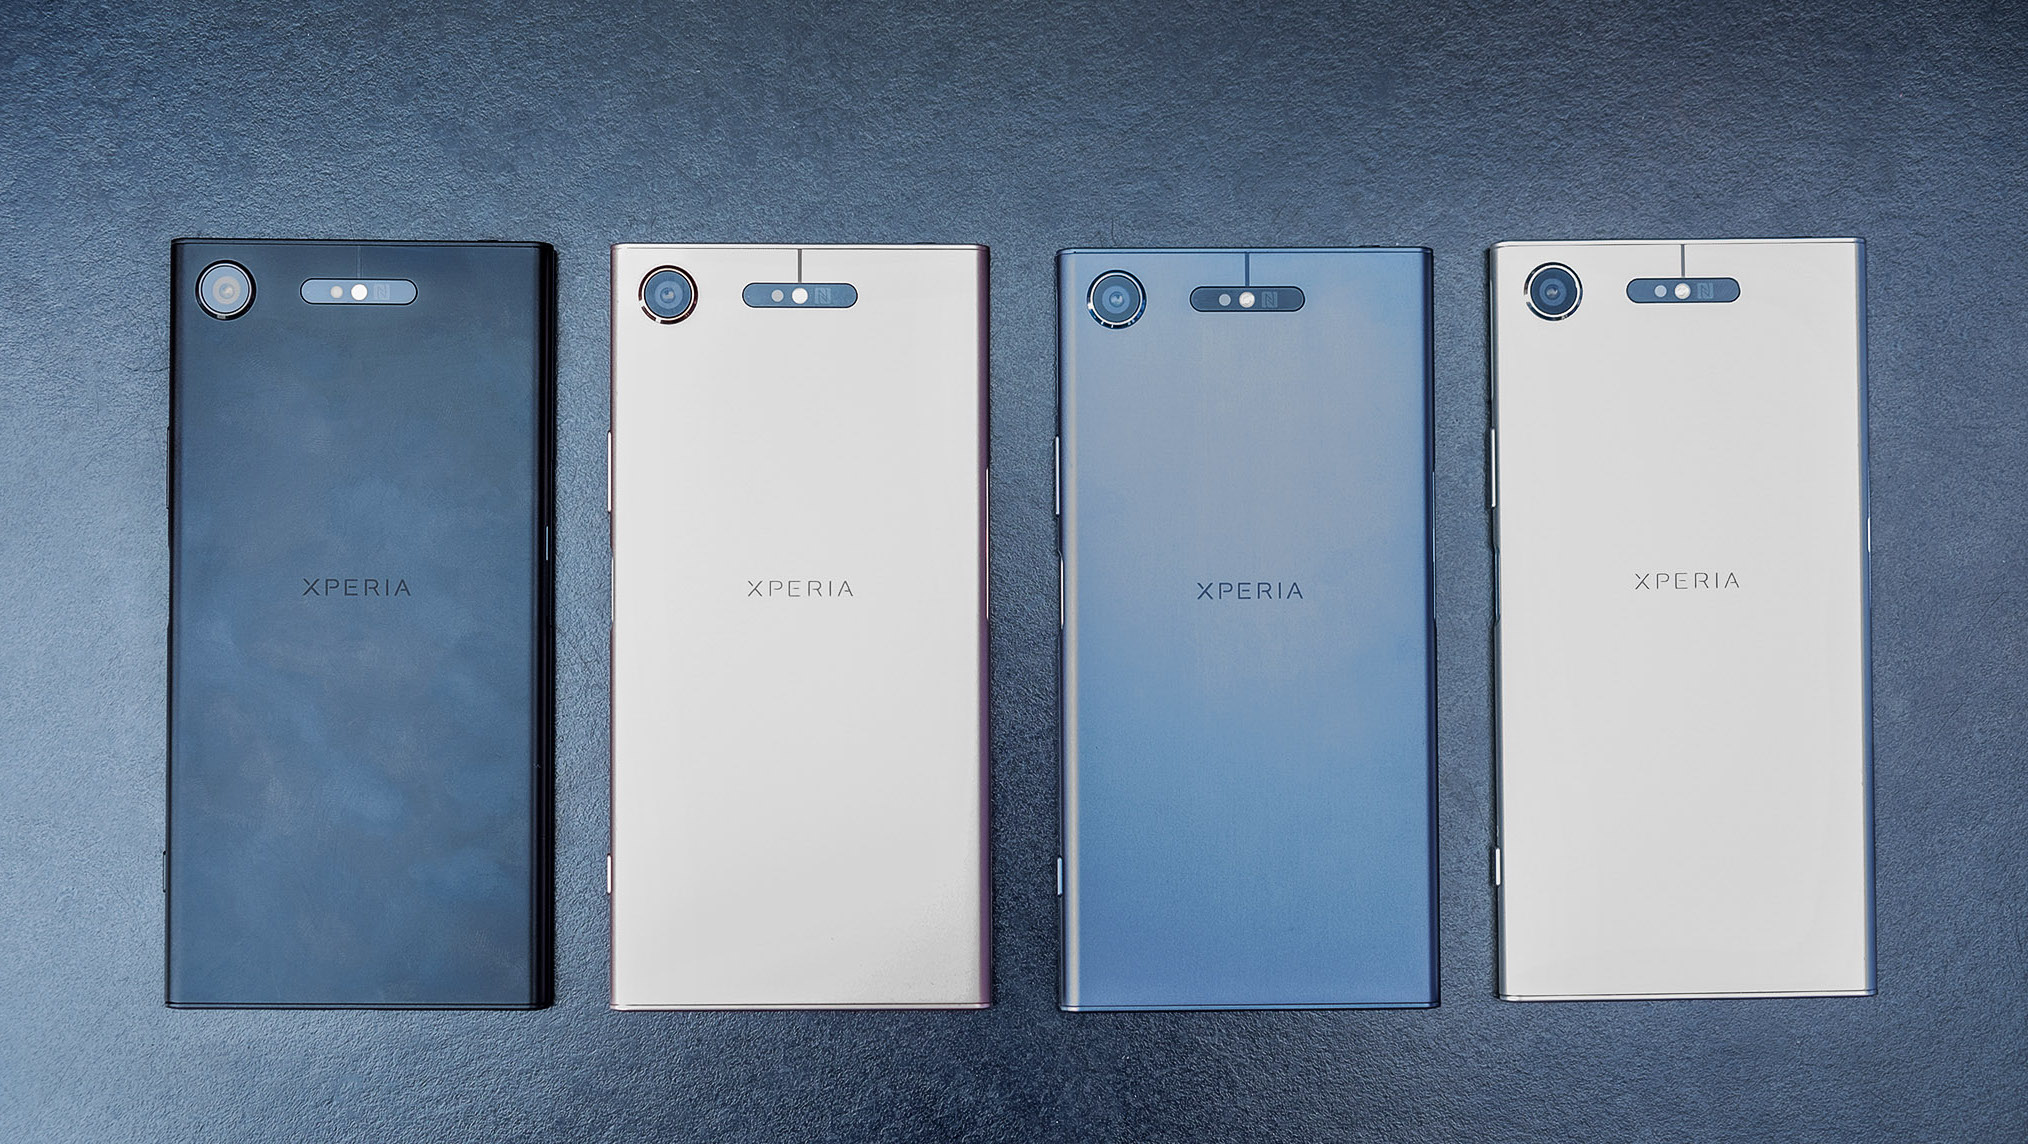 Sony introduced Xperia XZ1, XZ1 Compact and XA1 Plus in Russia